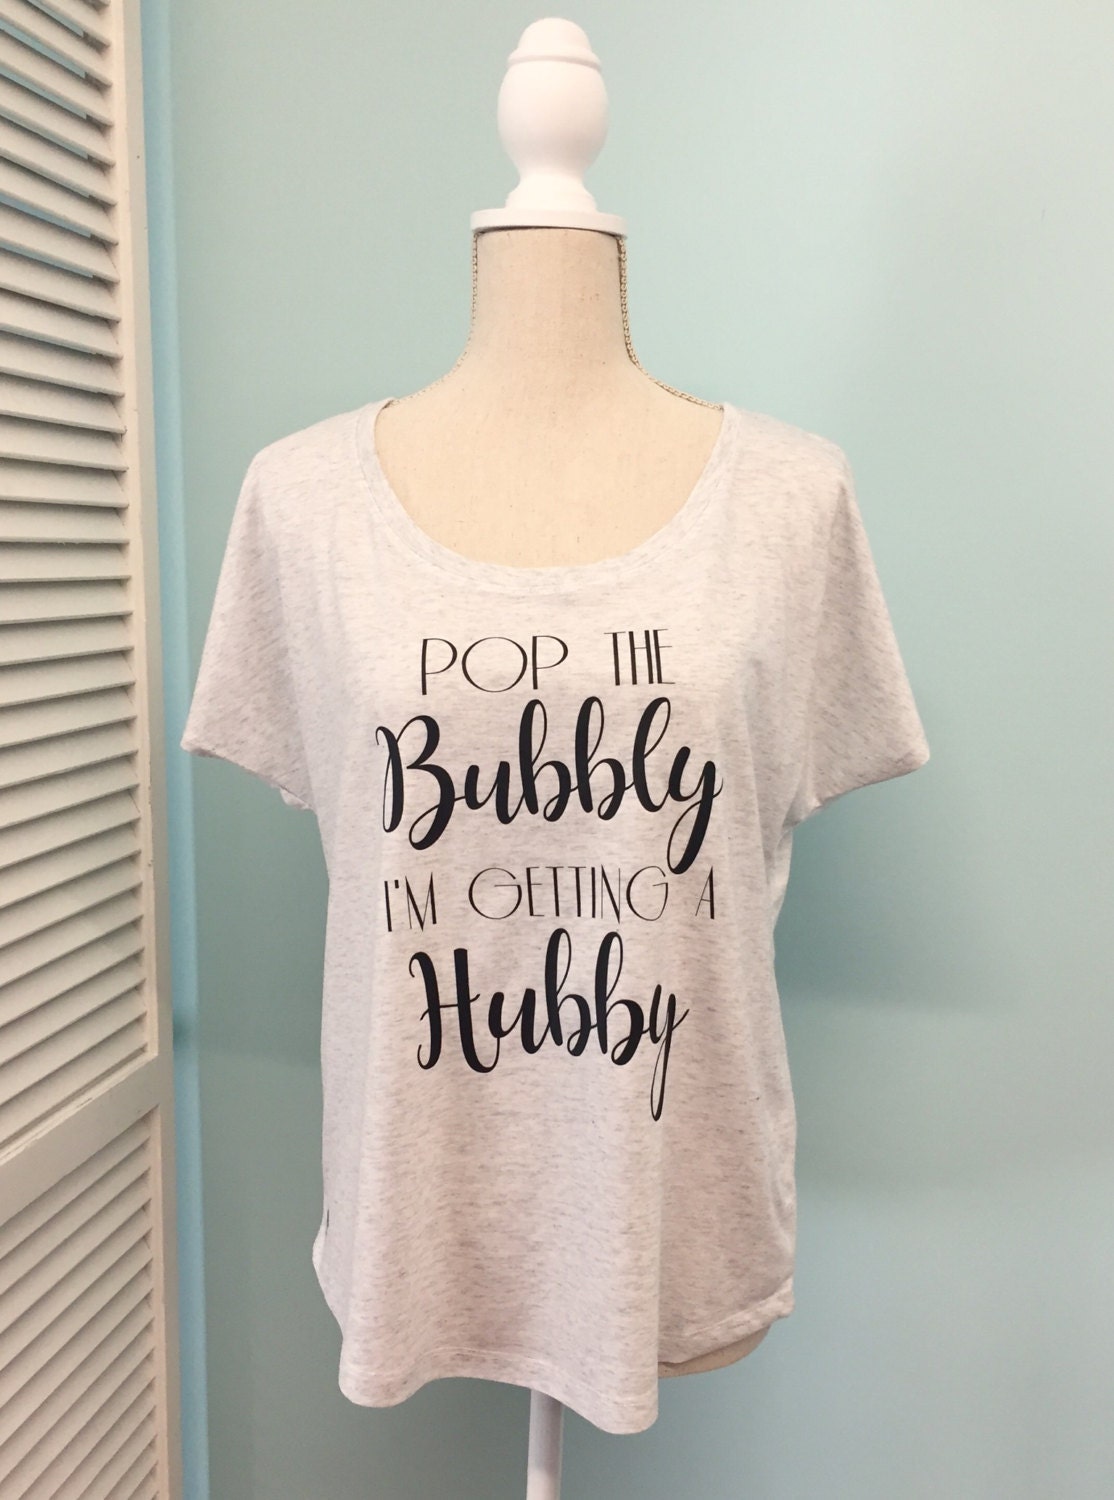 Pop the Bubbly I'm Getting a Hubby Bridal Tee Dolman | Etsy